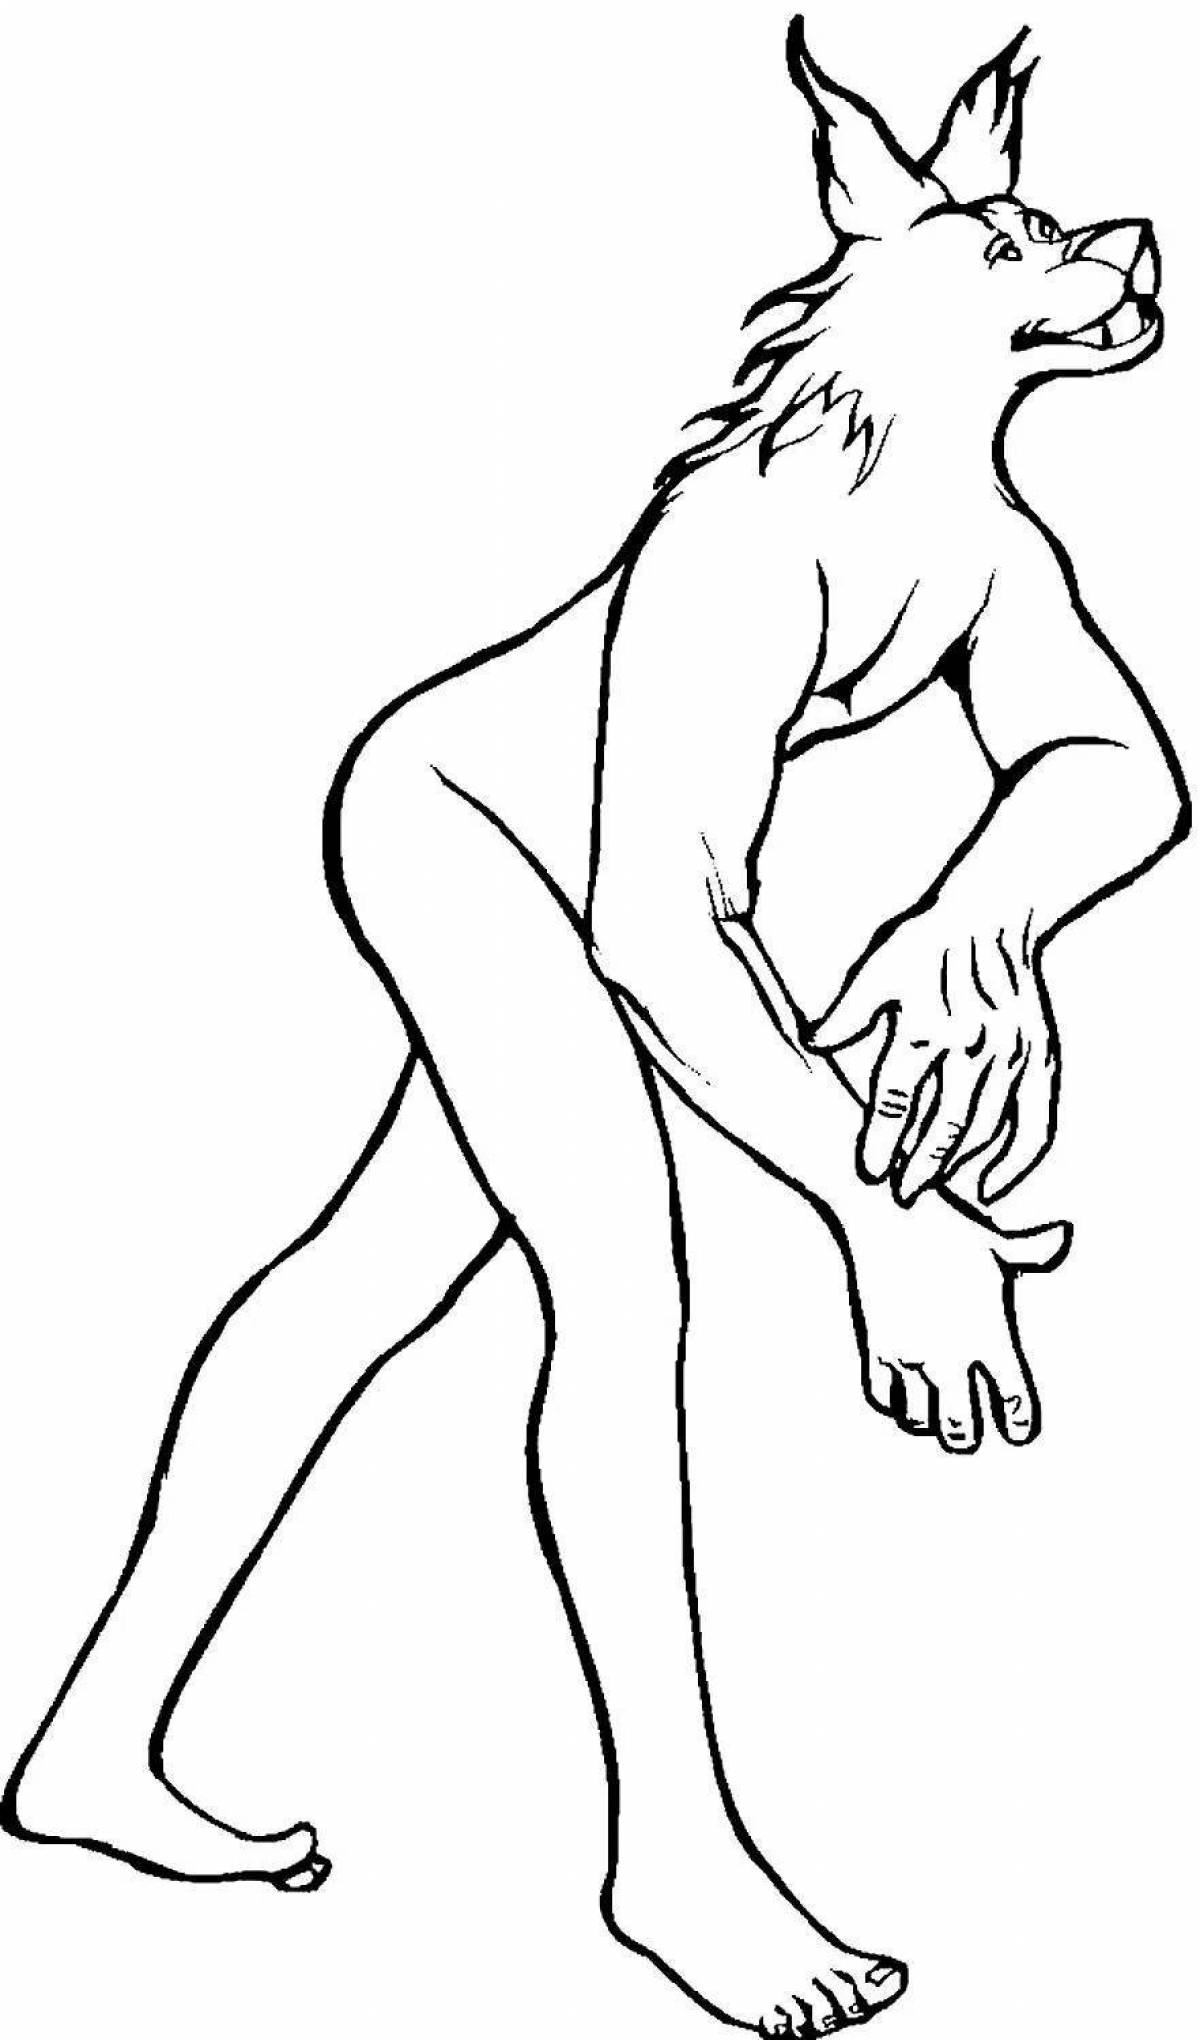 Frightening werewolf coloring page for kids